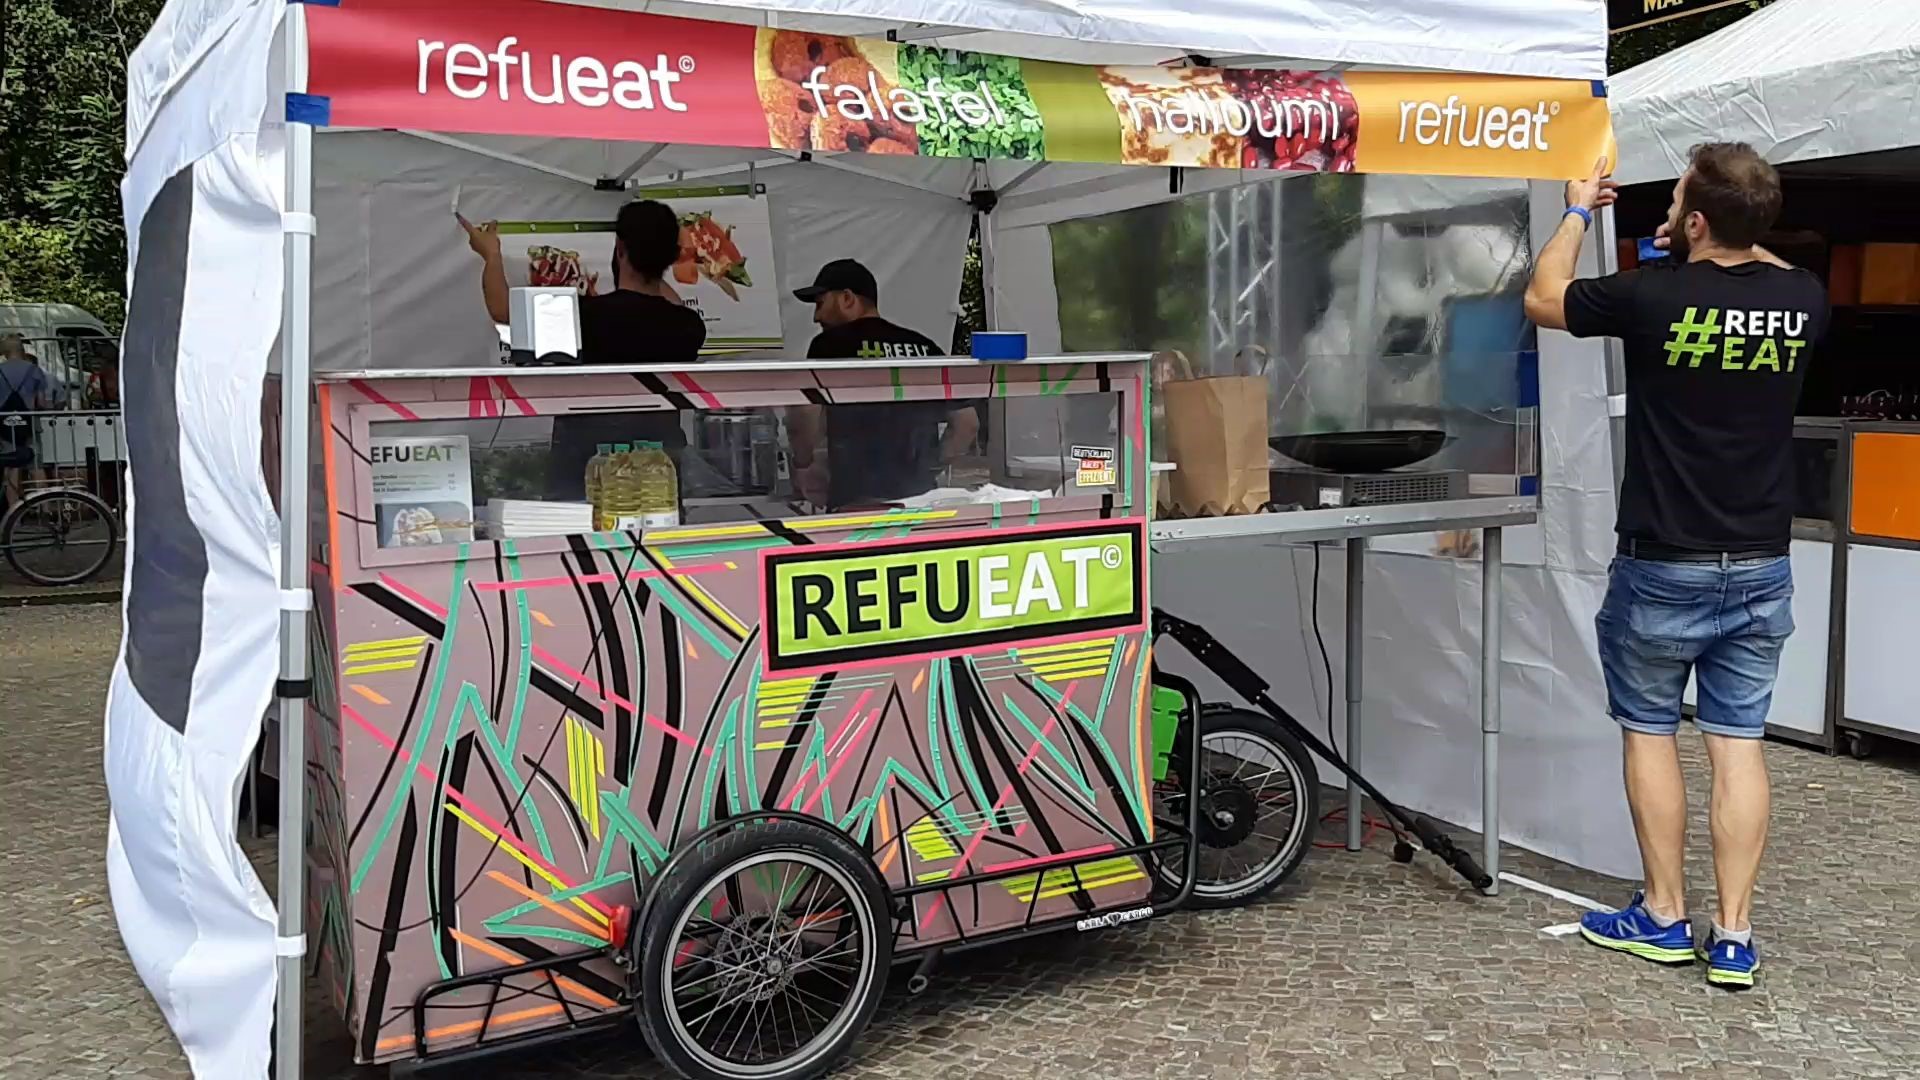 The RefuEat cart in a tent and preparing food for customers. The cart decorated with bright colours in abstract patterns.